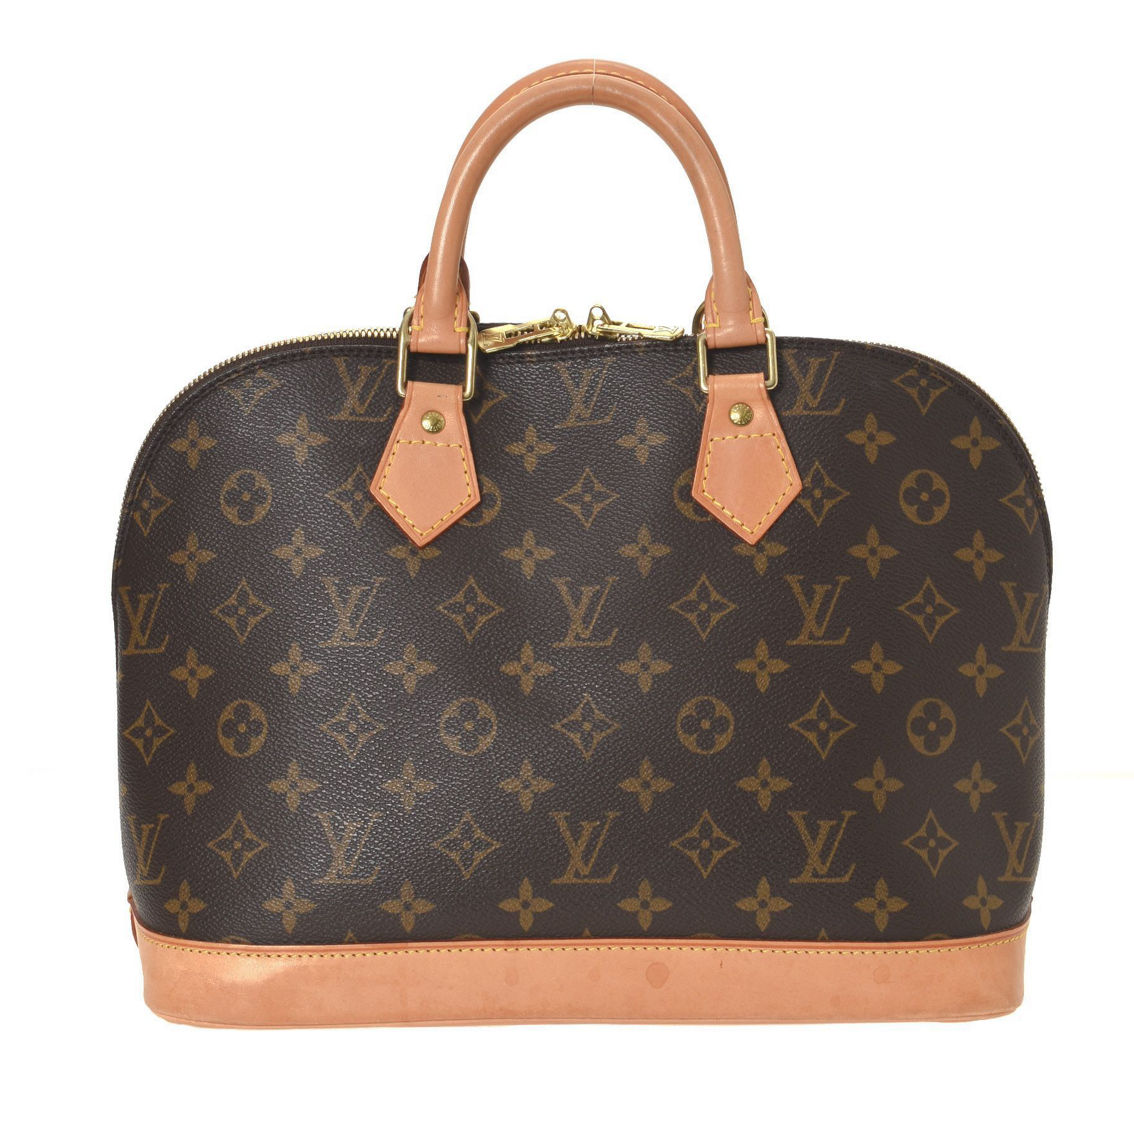 Authenticated Pre-owned Louis Vuitton Alma Pm